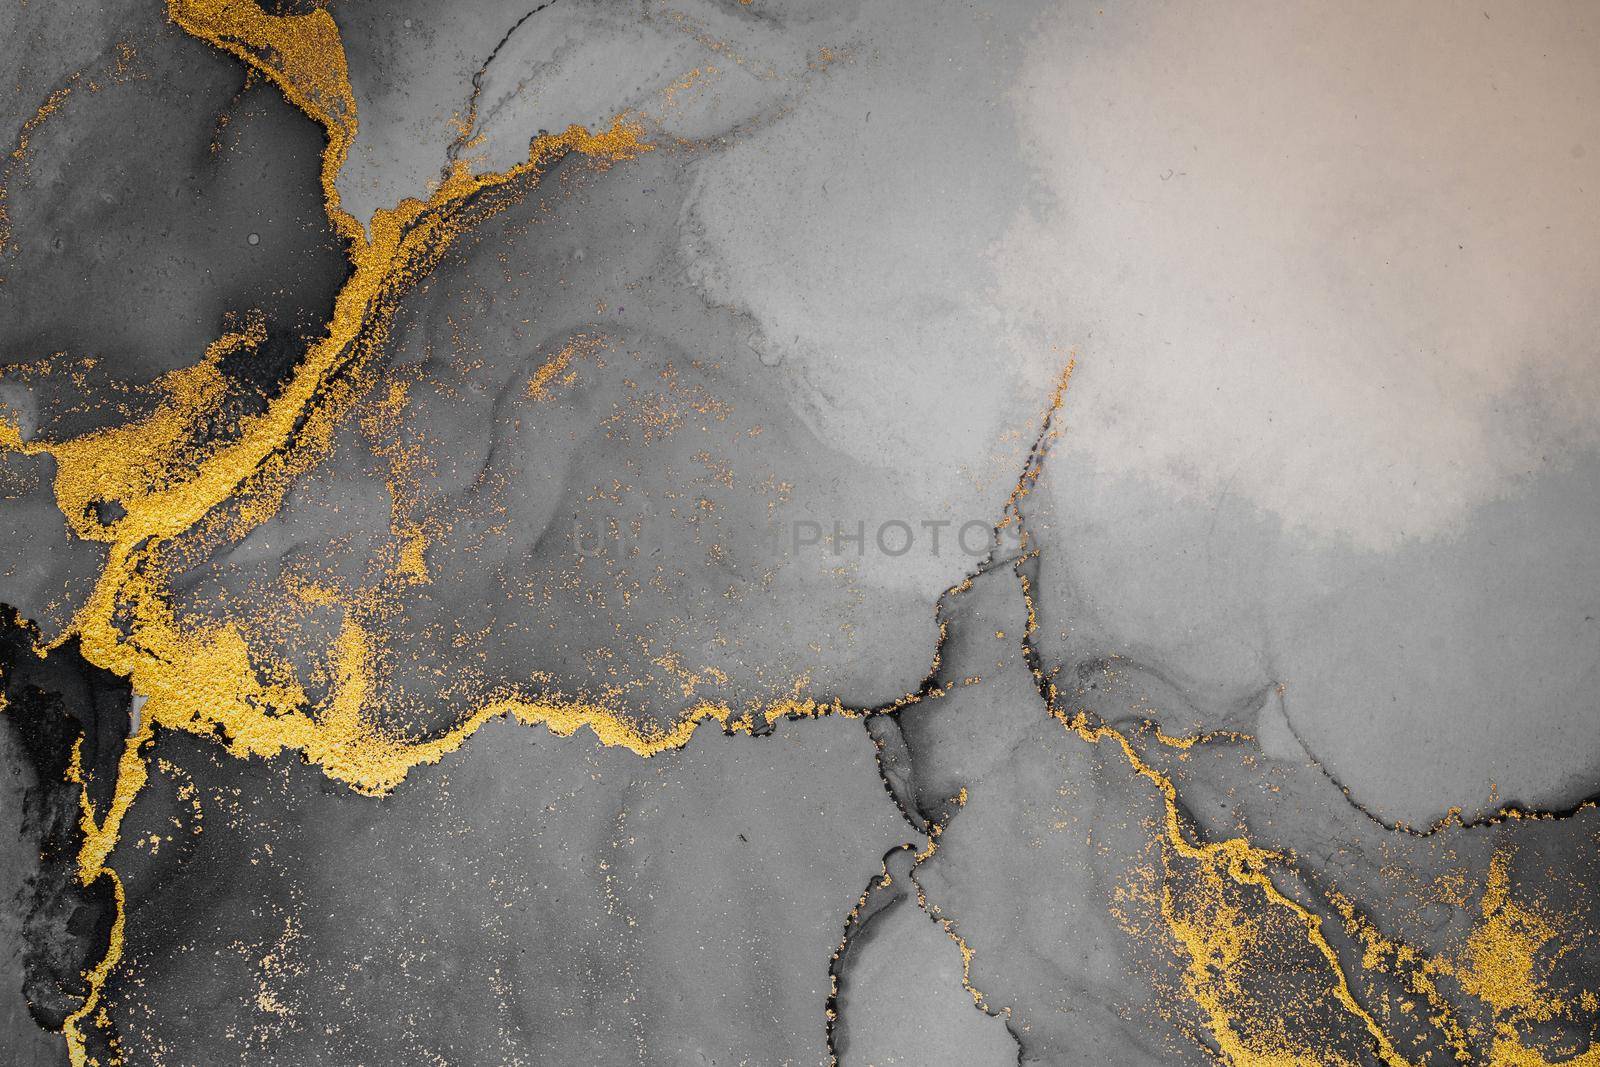 Dark gold abstract background of marble liquid ink art painting on paper . Image of original artwork watercolor alcohol ink paint on high quality paper texture .